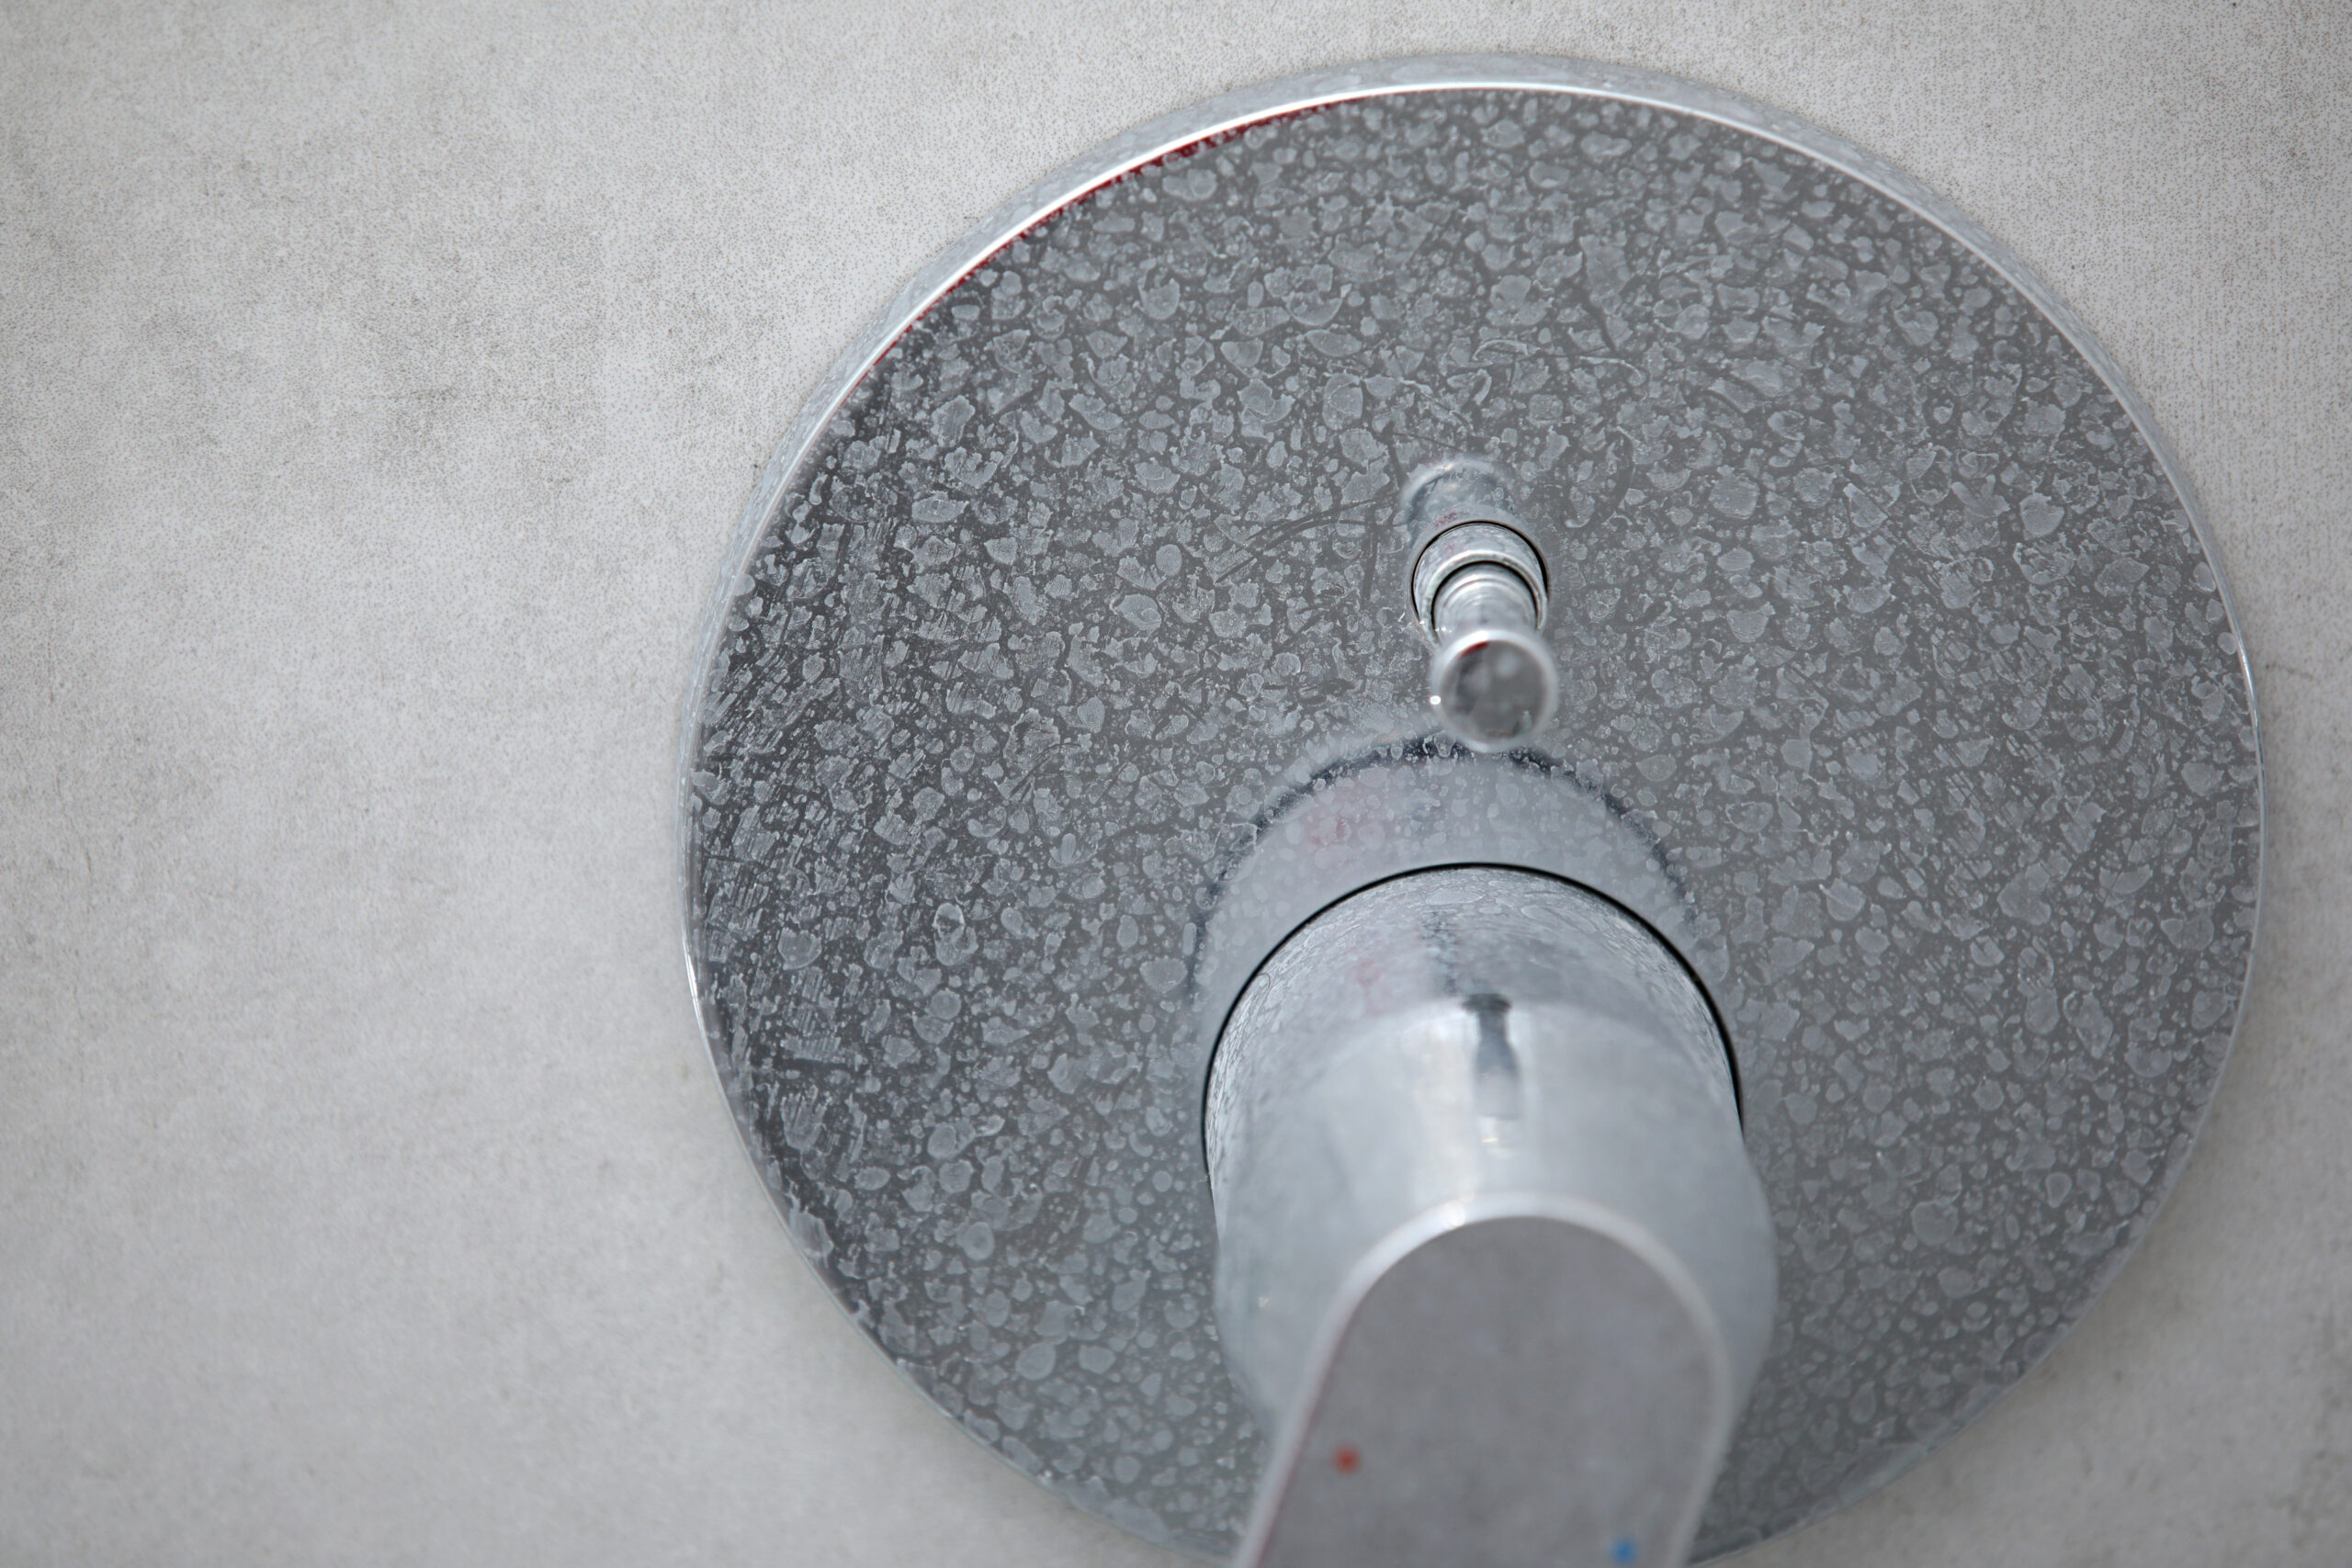 shower faucet with limescale on it from hard water